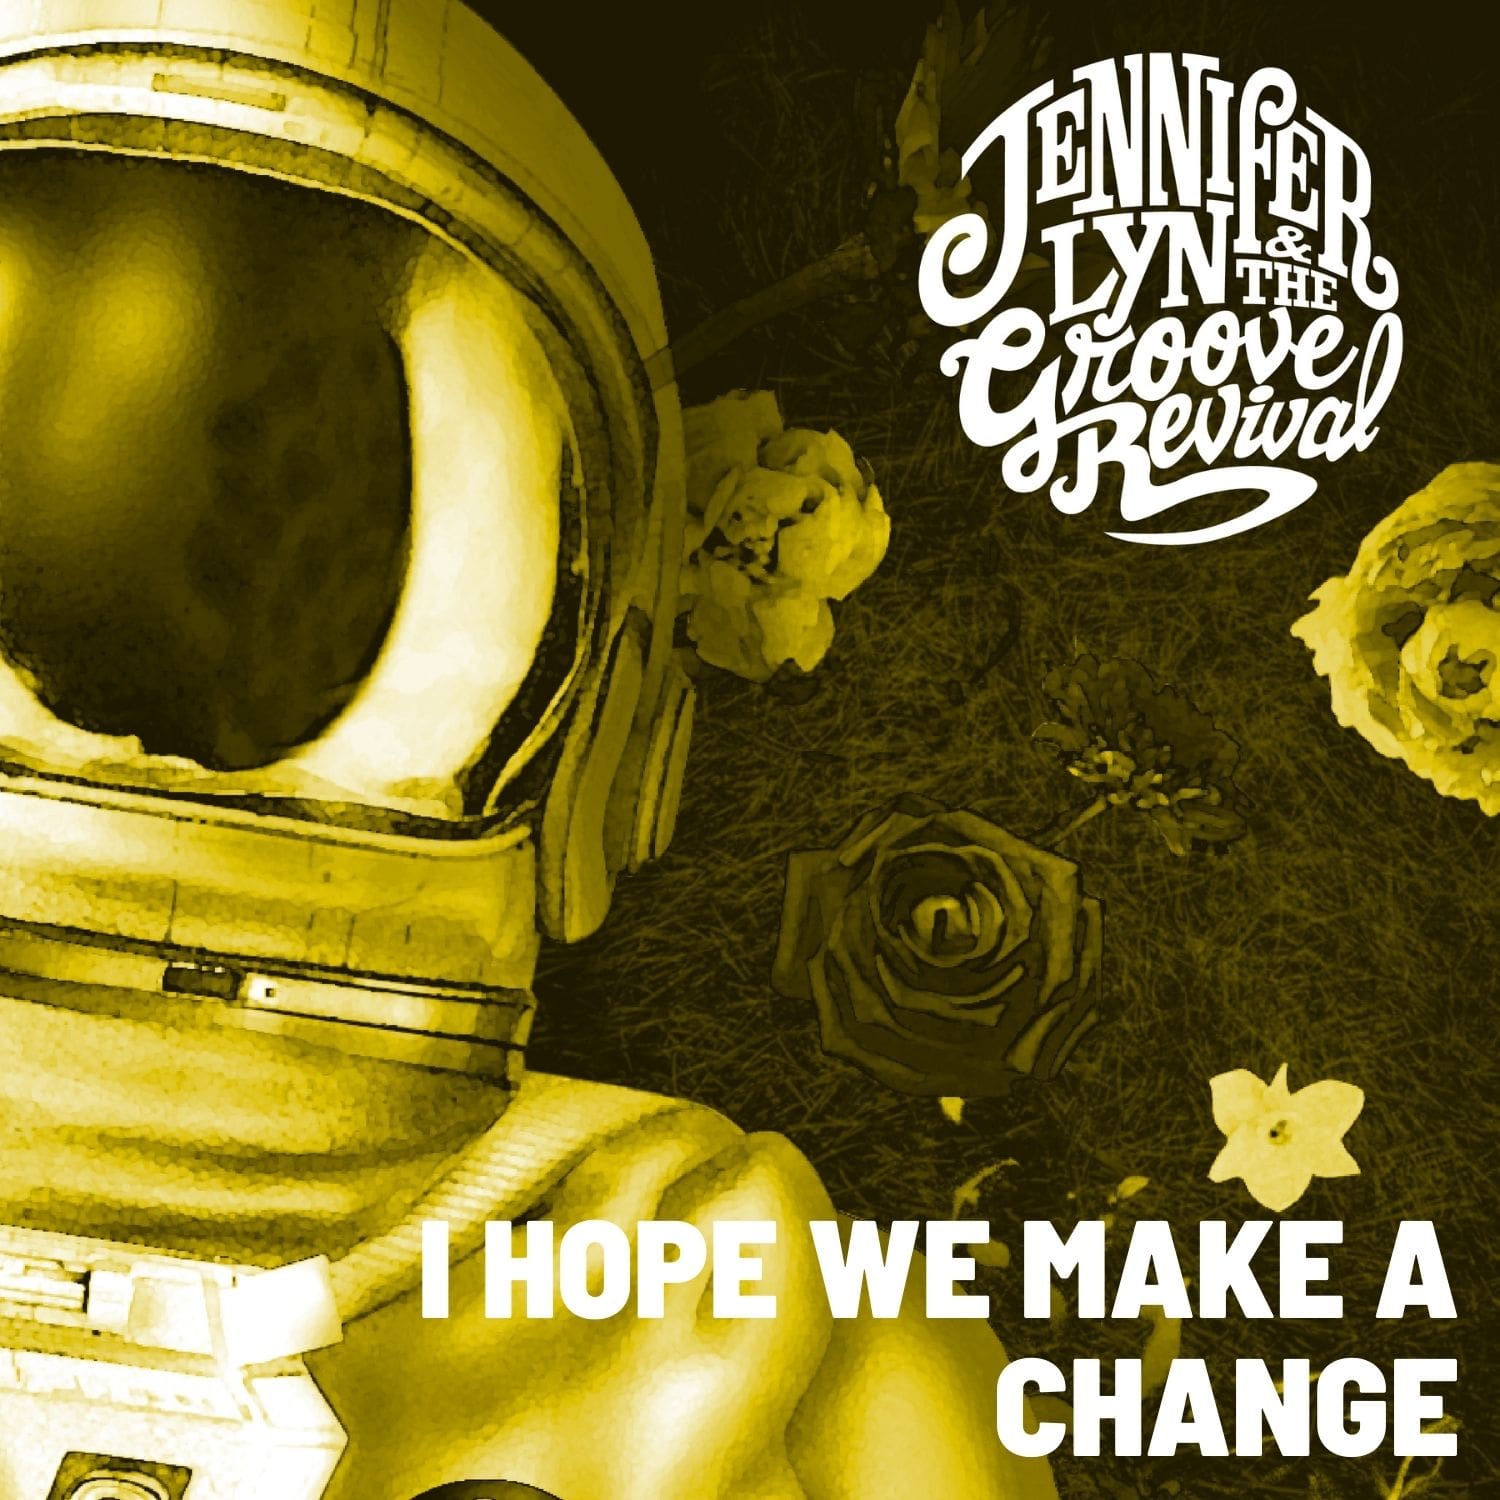 Listen to I Hope We Make A Change by Jennifer Lyn & The Groove Revival